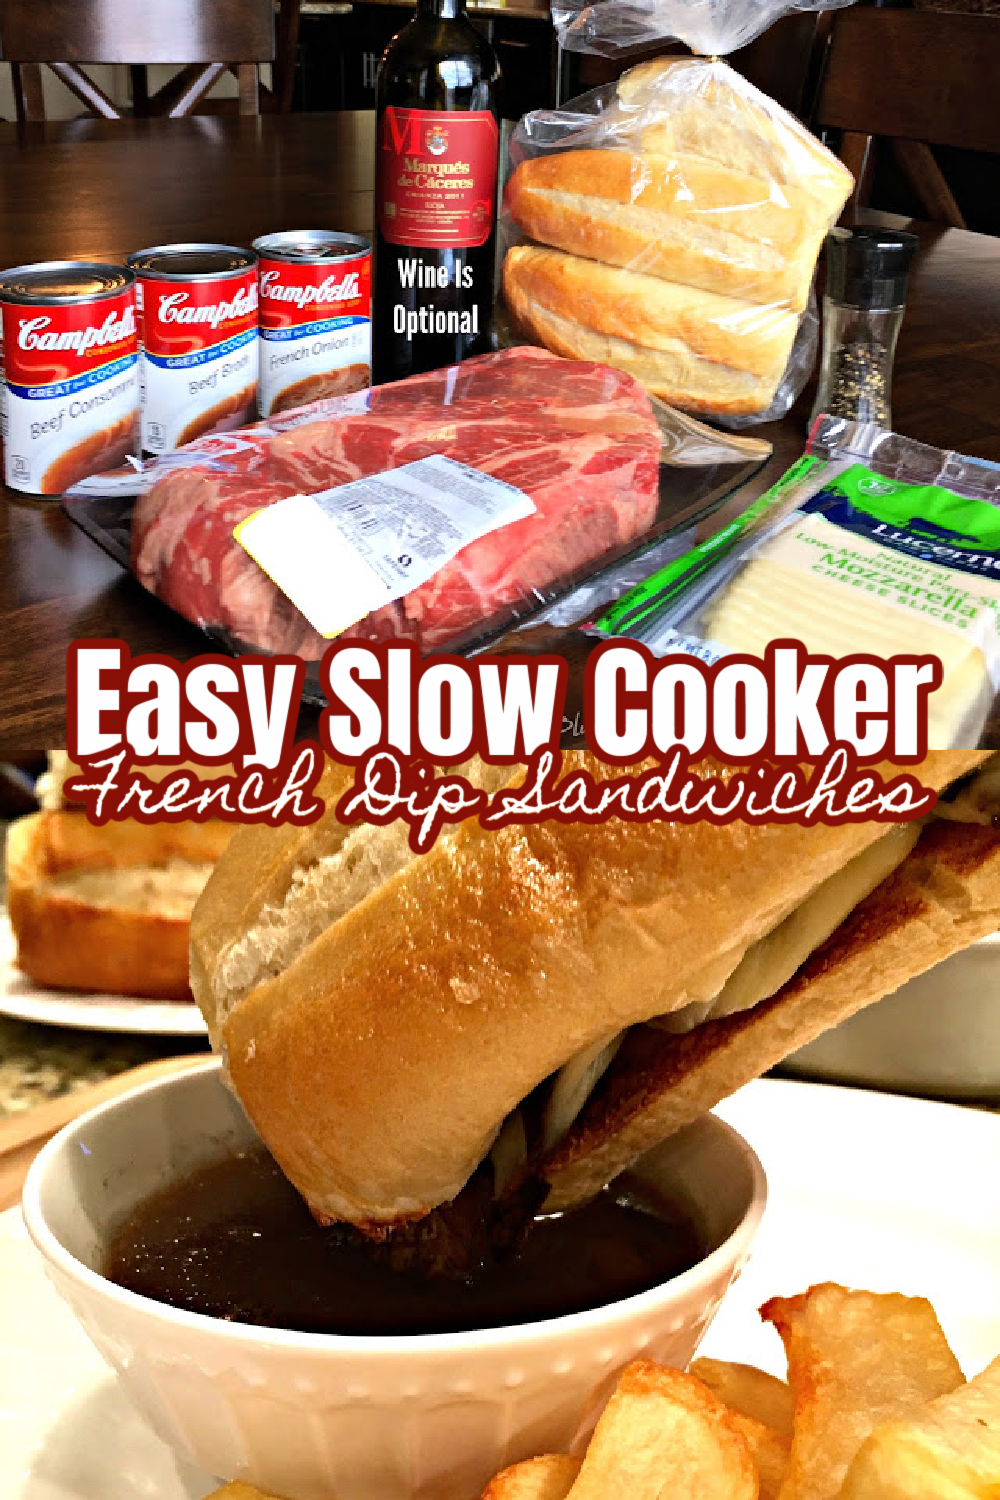 SLOW COOKER FRENCH DIP SANDWICHES (EASY)